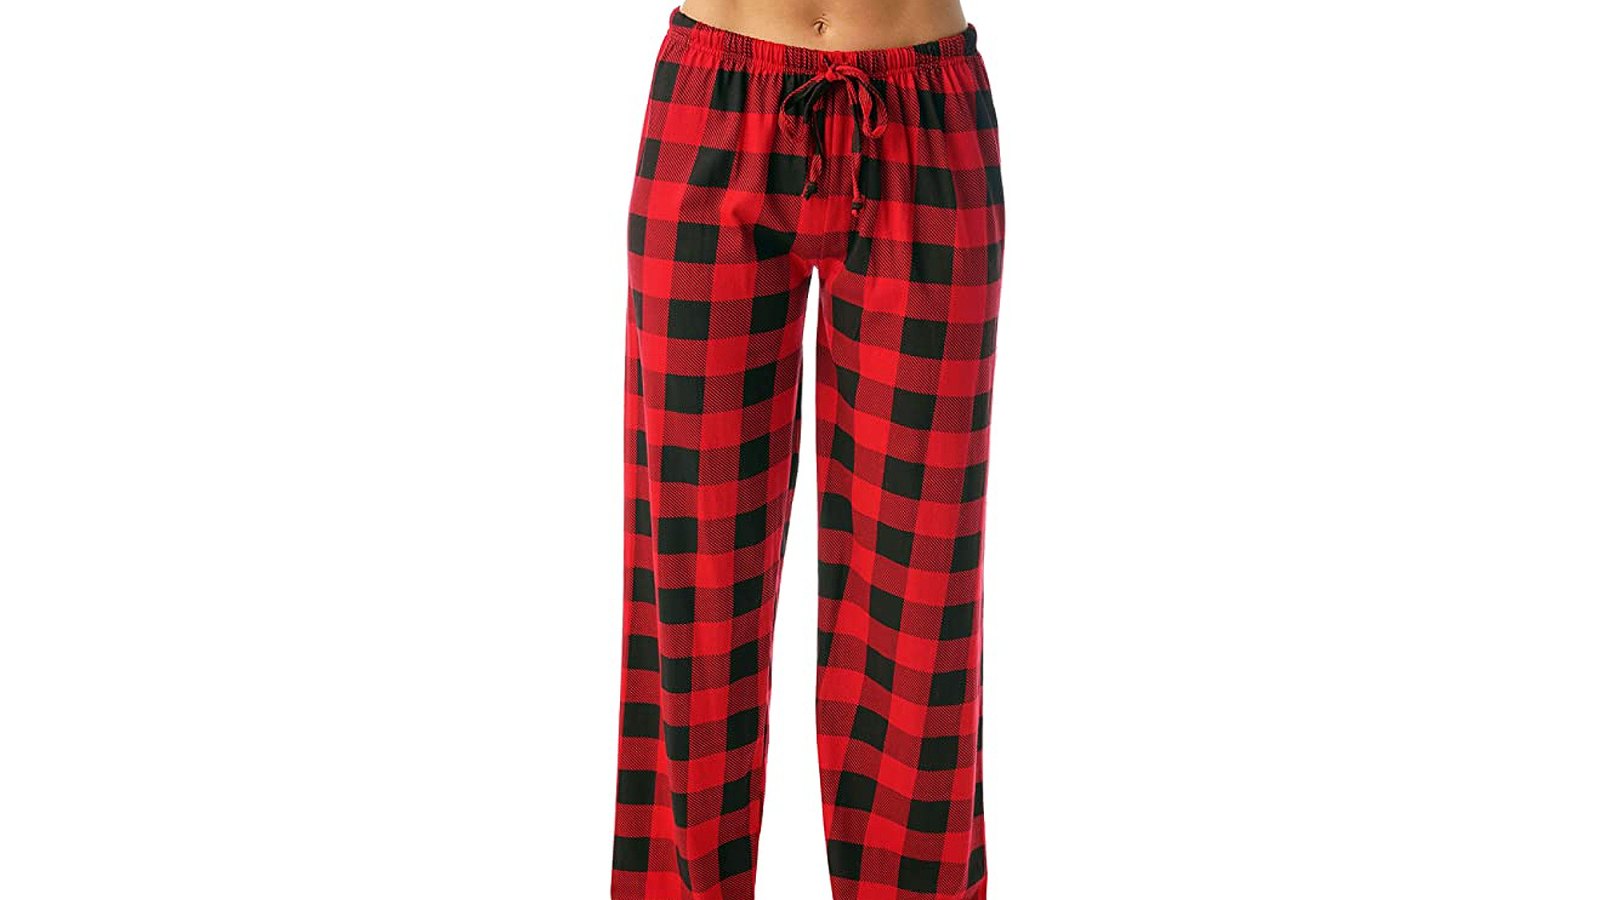 11 Best Pajama Bottoms for 2023